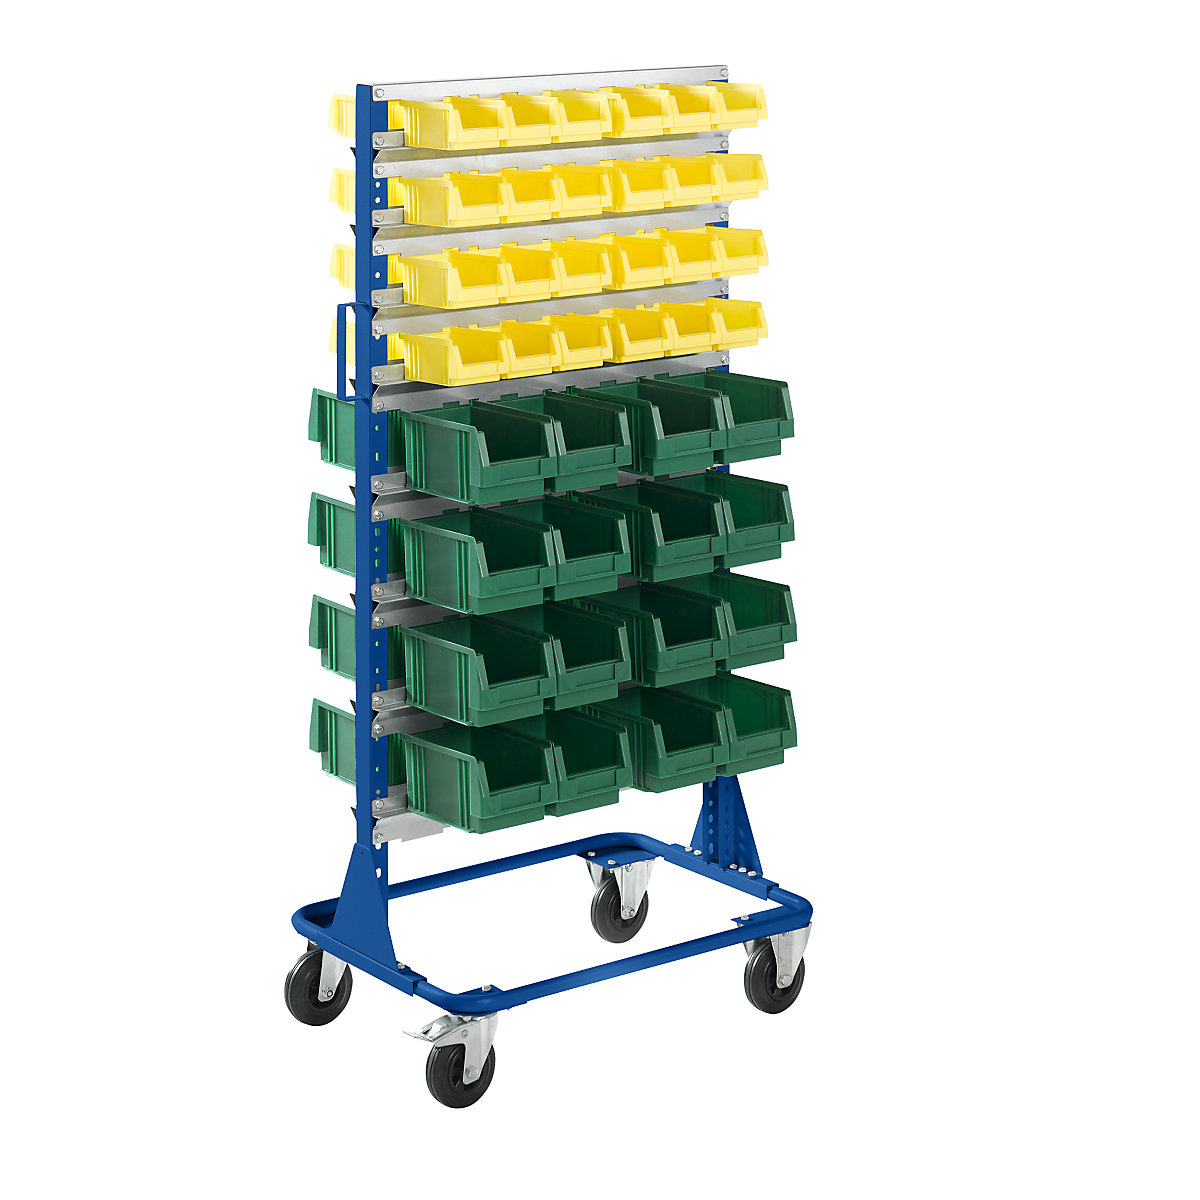 Mobile rack, height 1588 mm, mobile rack with 80 open fronted storage bins, gentian blue-6